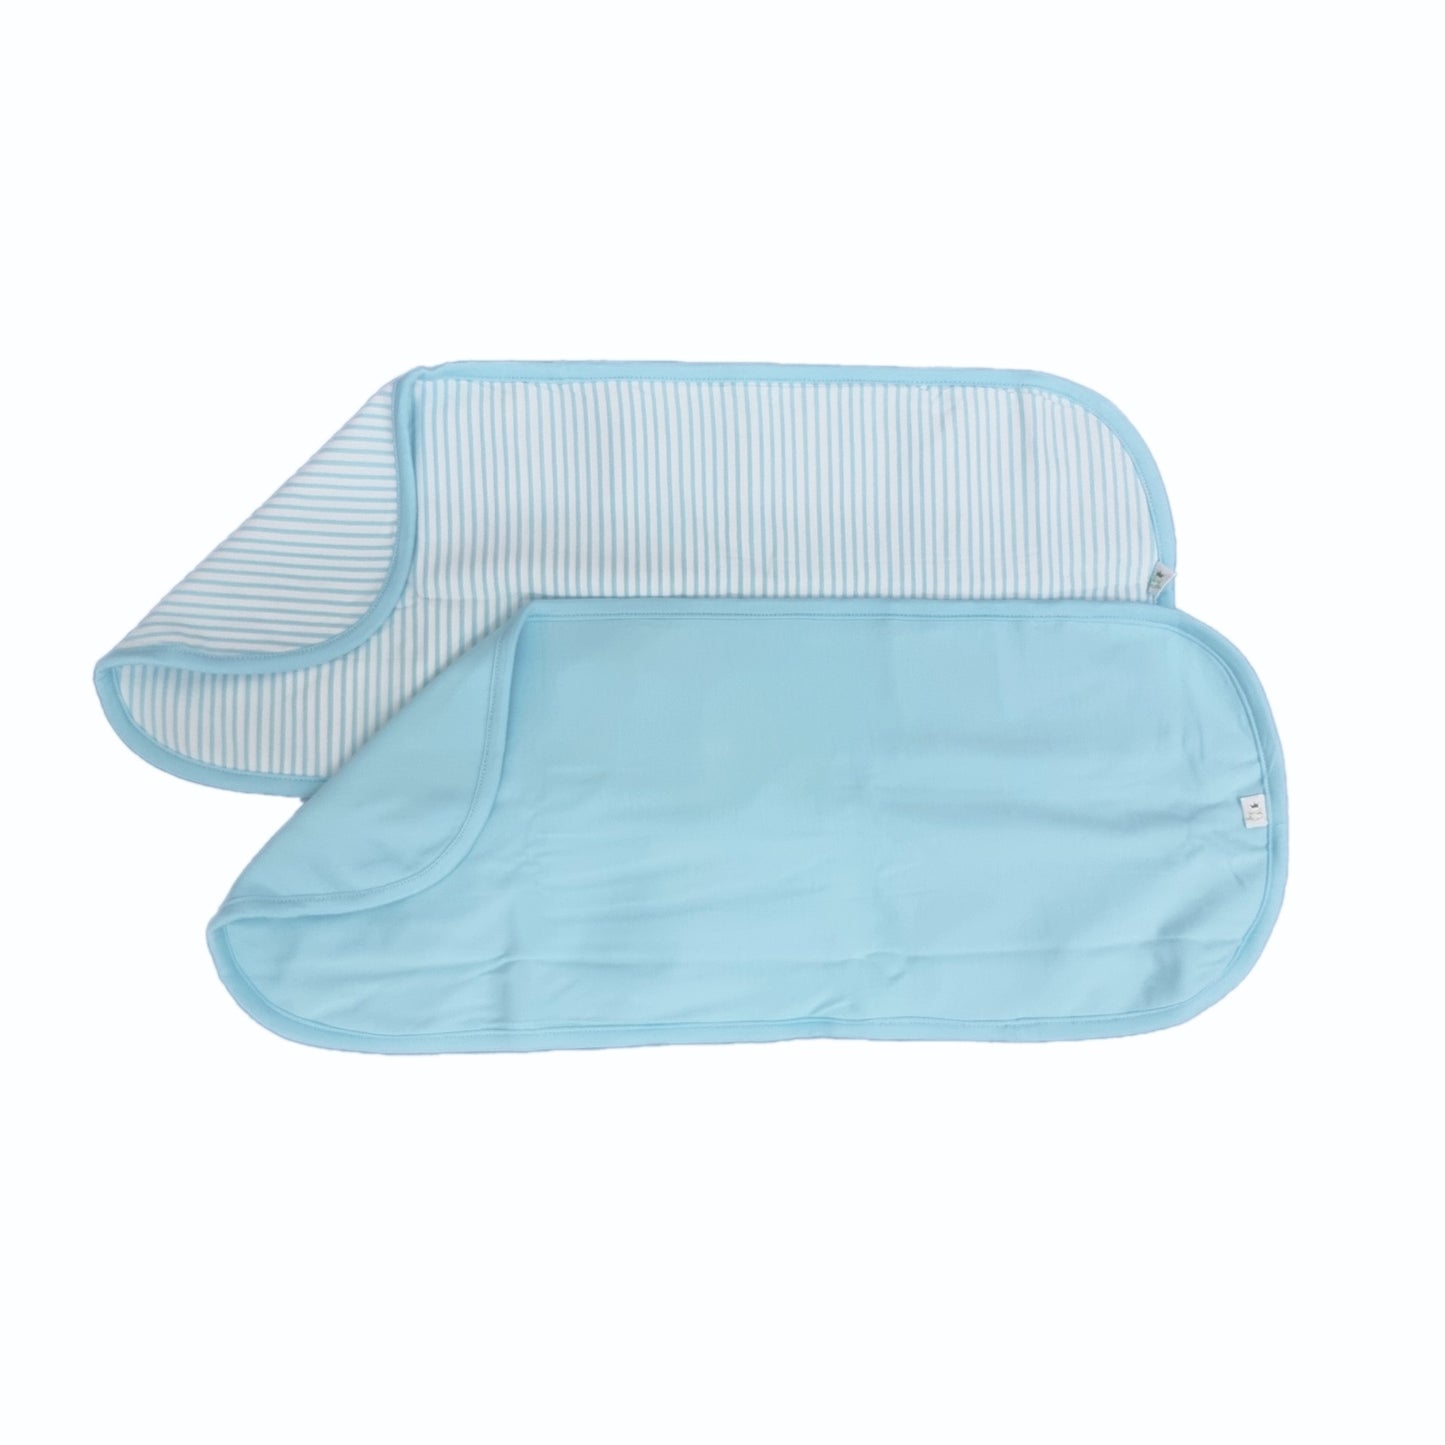 Baby Bamboo Burp Cloths (Pack of 2)